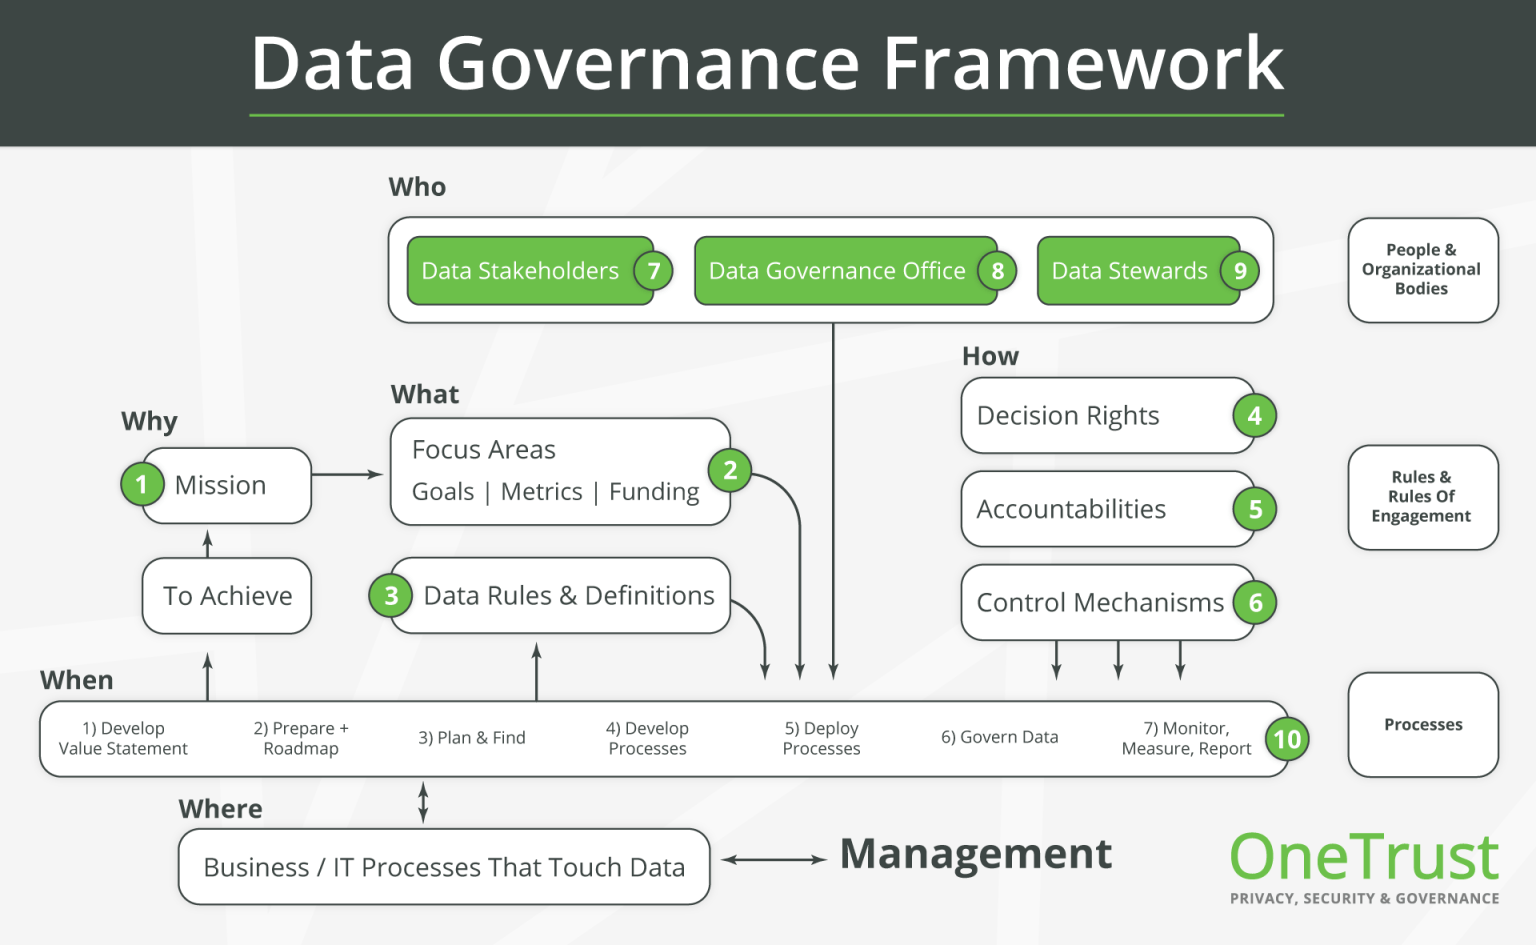 Flow chart mapping out the who, what, where, why and how stages of the data governance framework